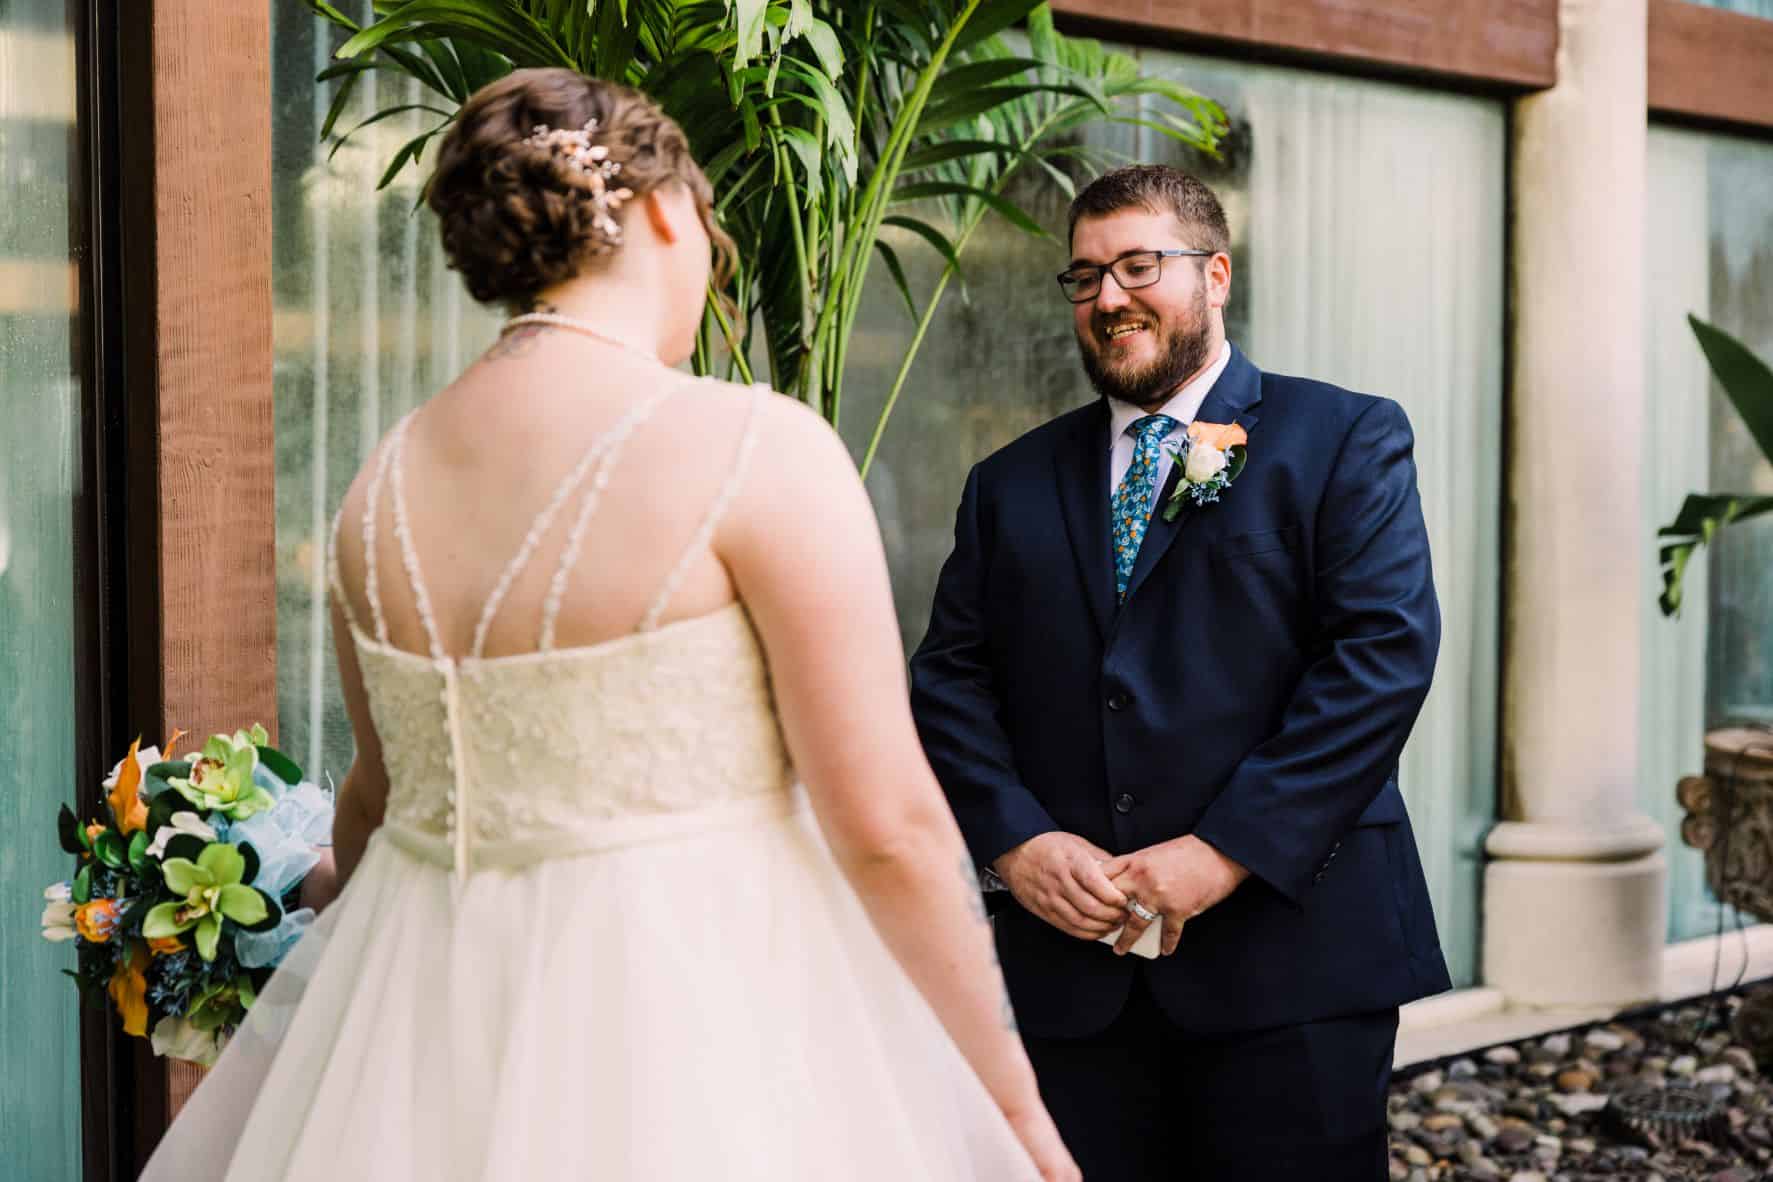 Universal Orlando Wedding - Just Marry Weddings - Anna So Photography - First Look